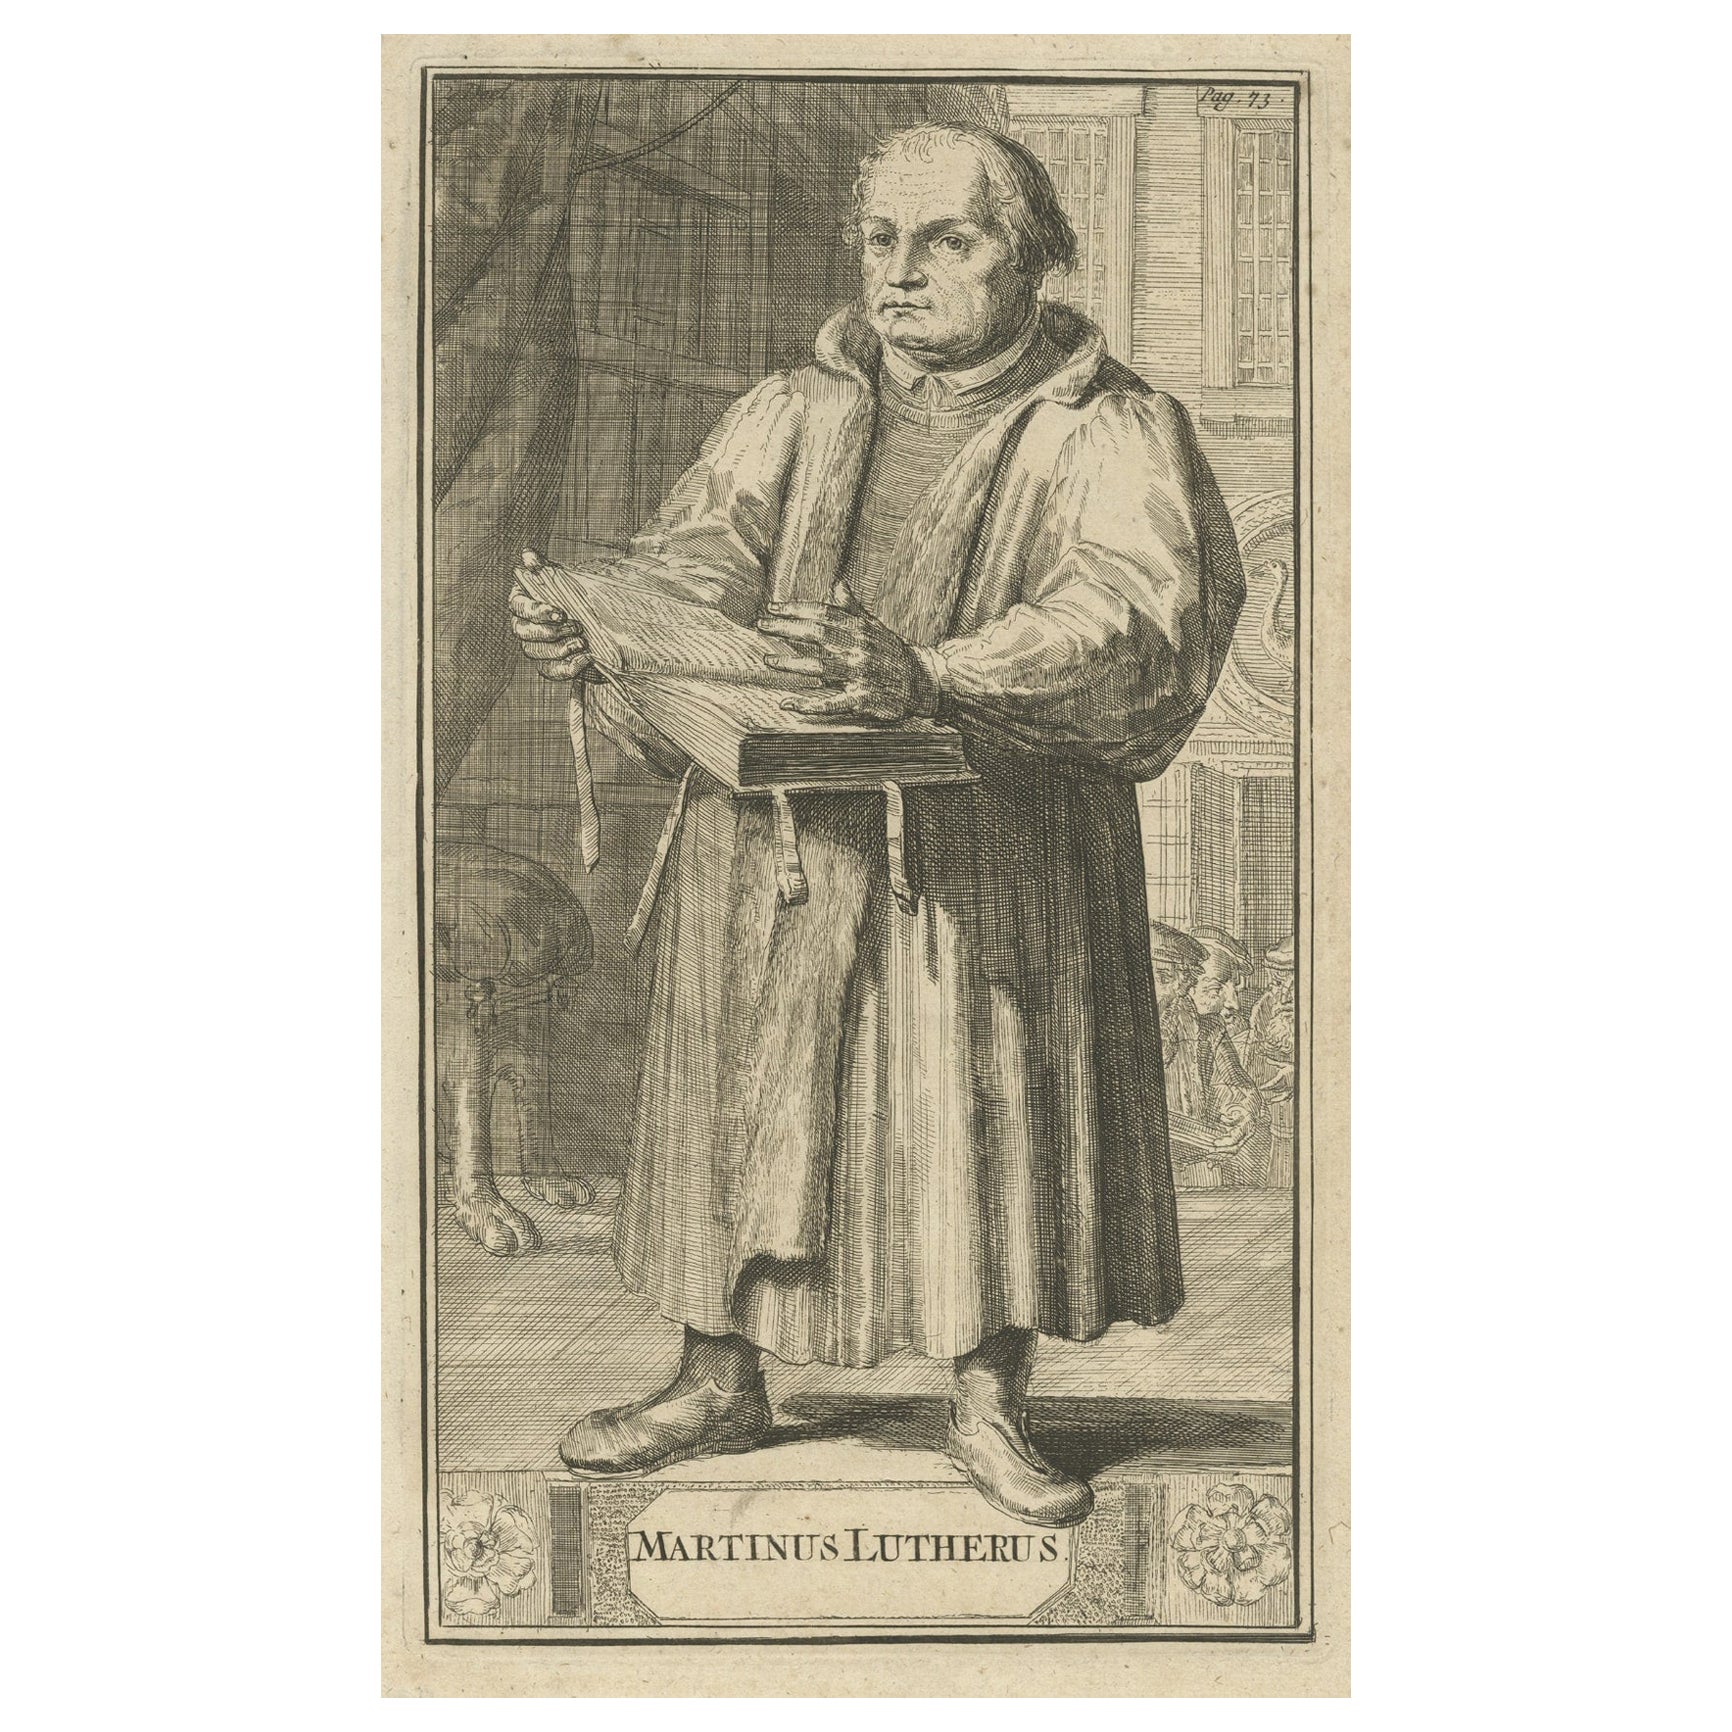 Impression ancienne de Martin Luther, 1701